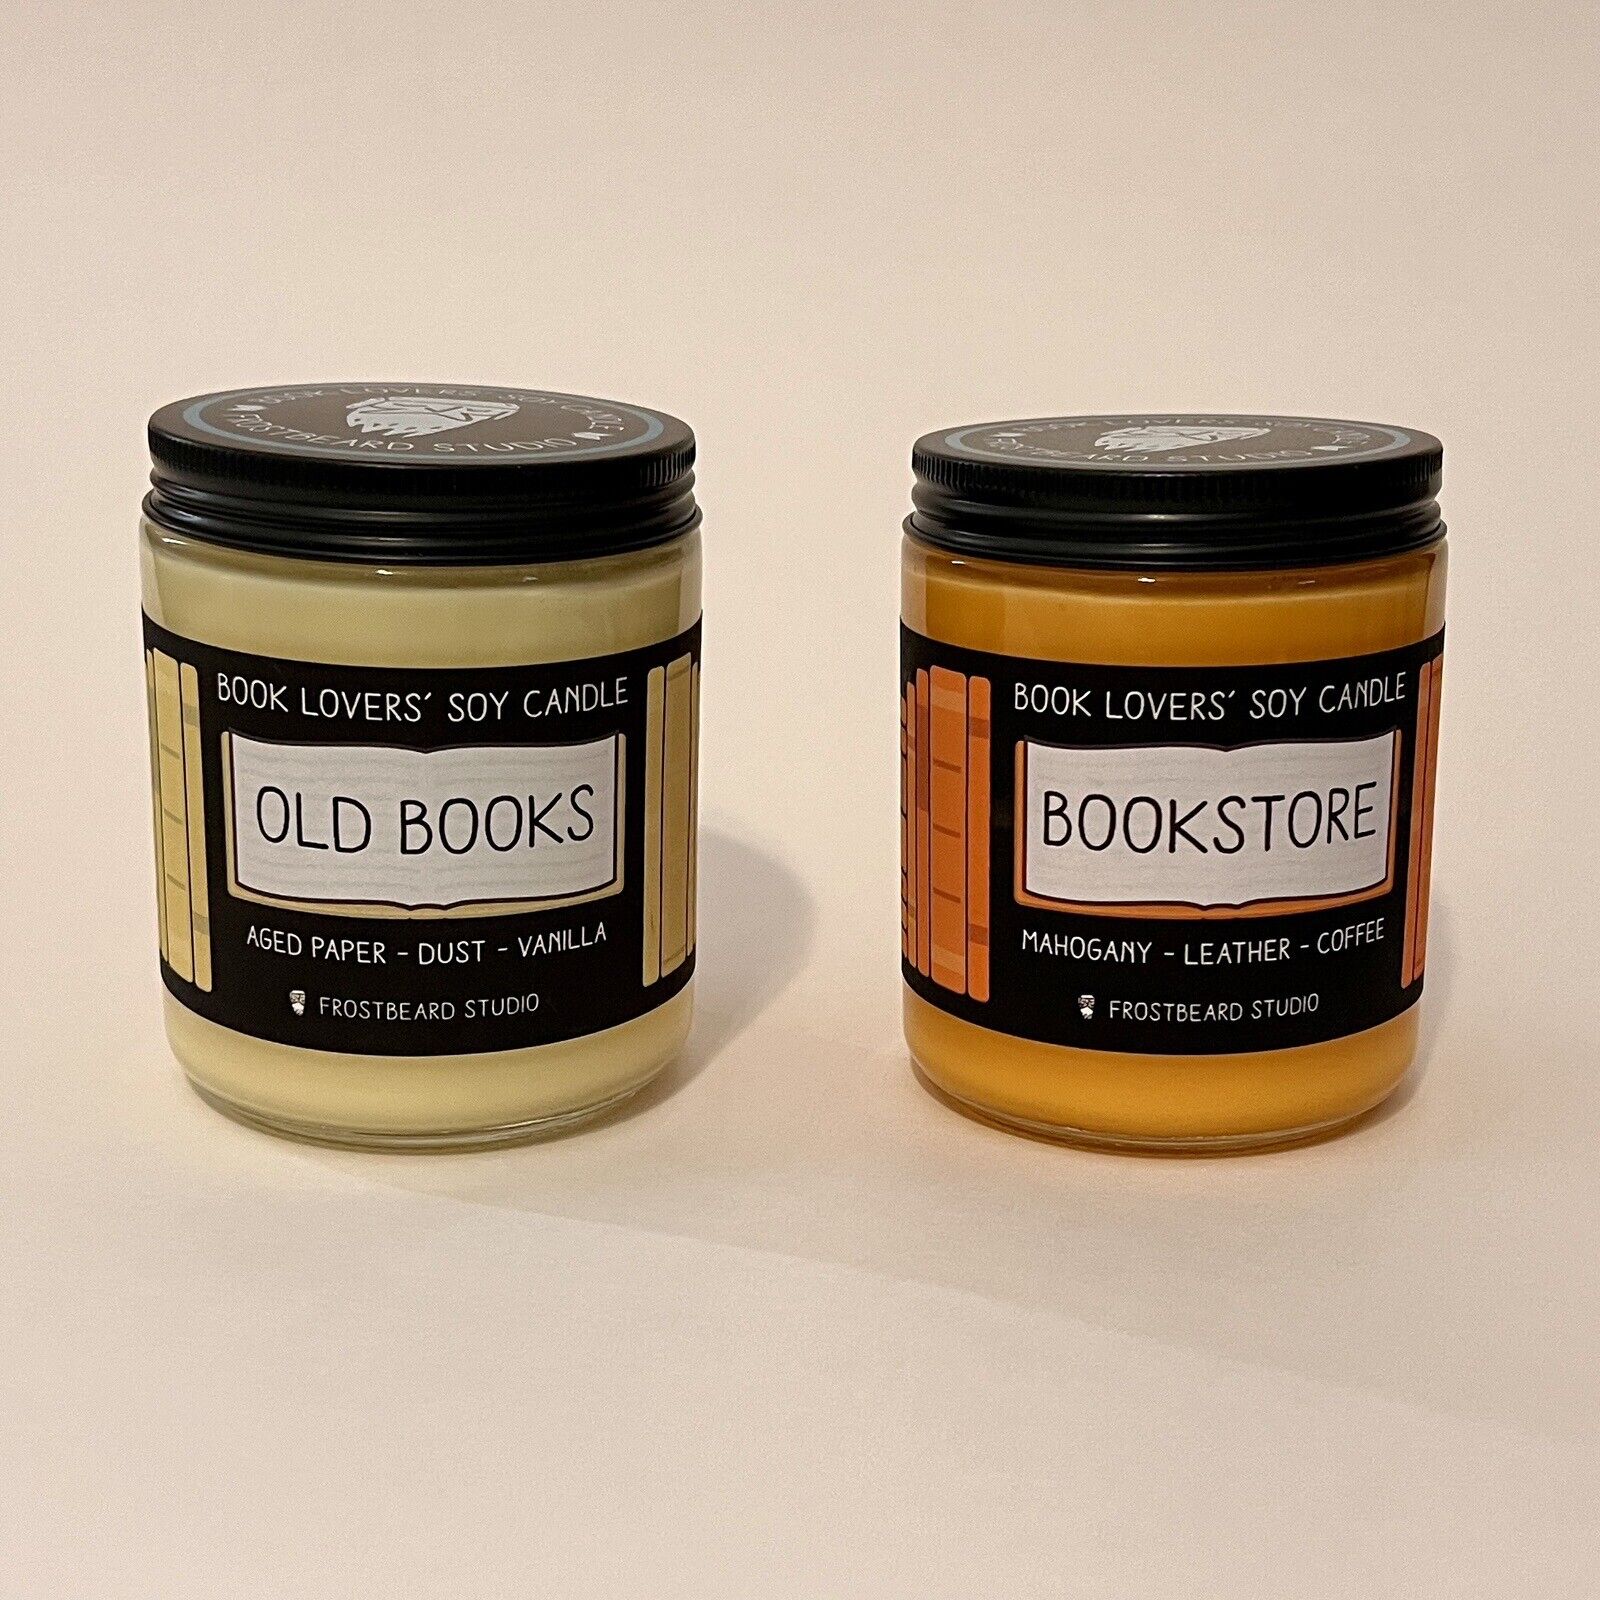 NEW Frostbeard Studio Book Lovers' Hand Poured Soy Candle Bundle